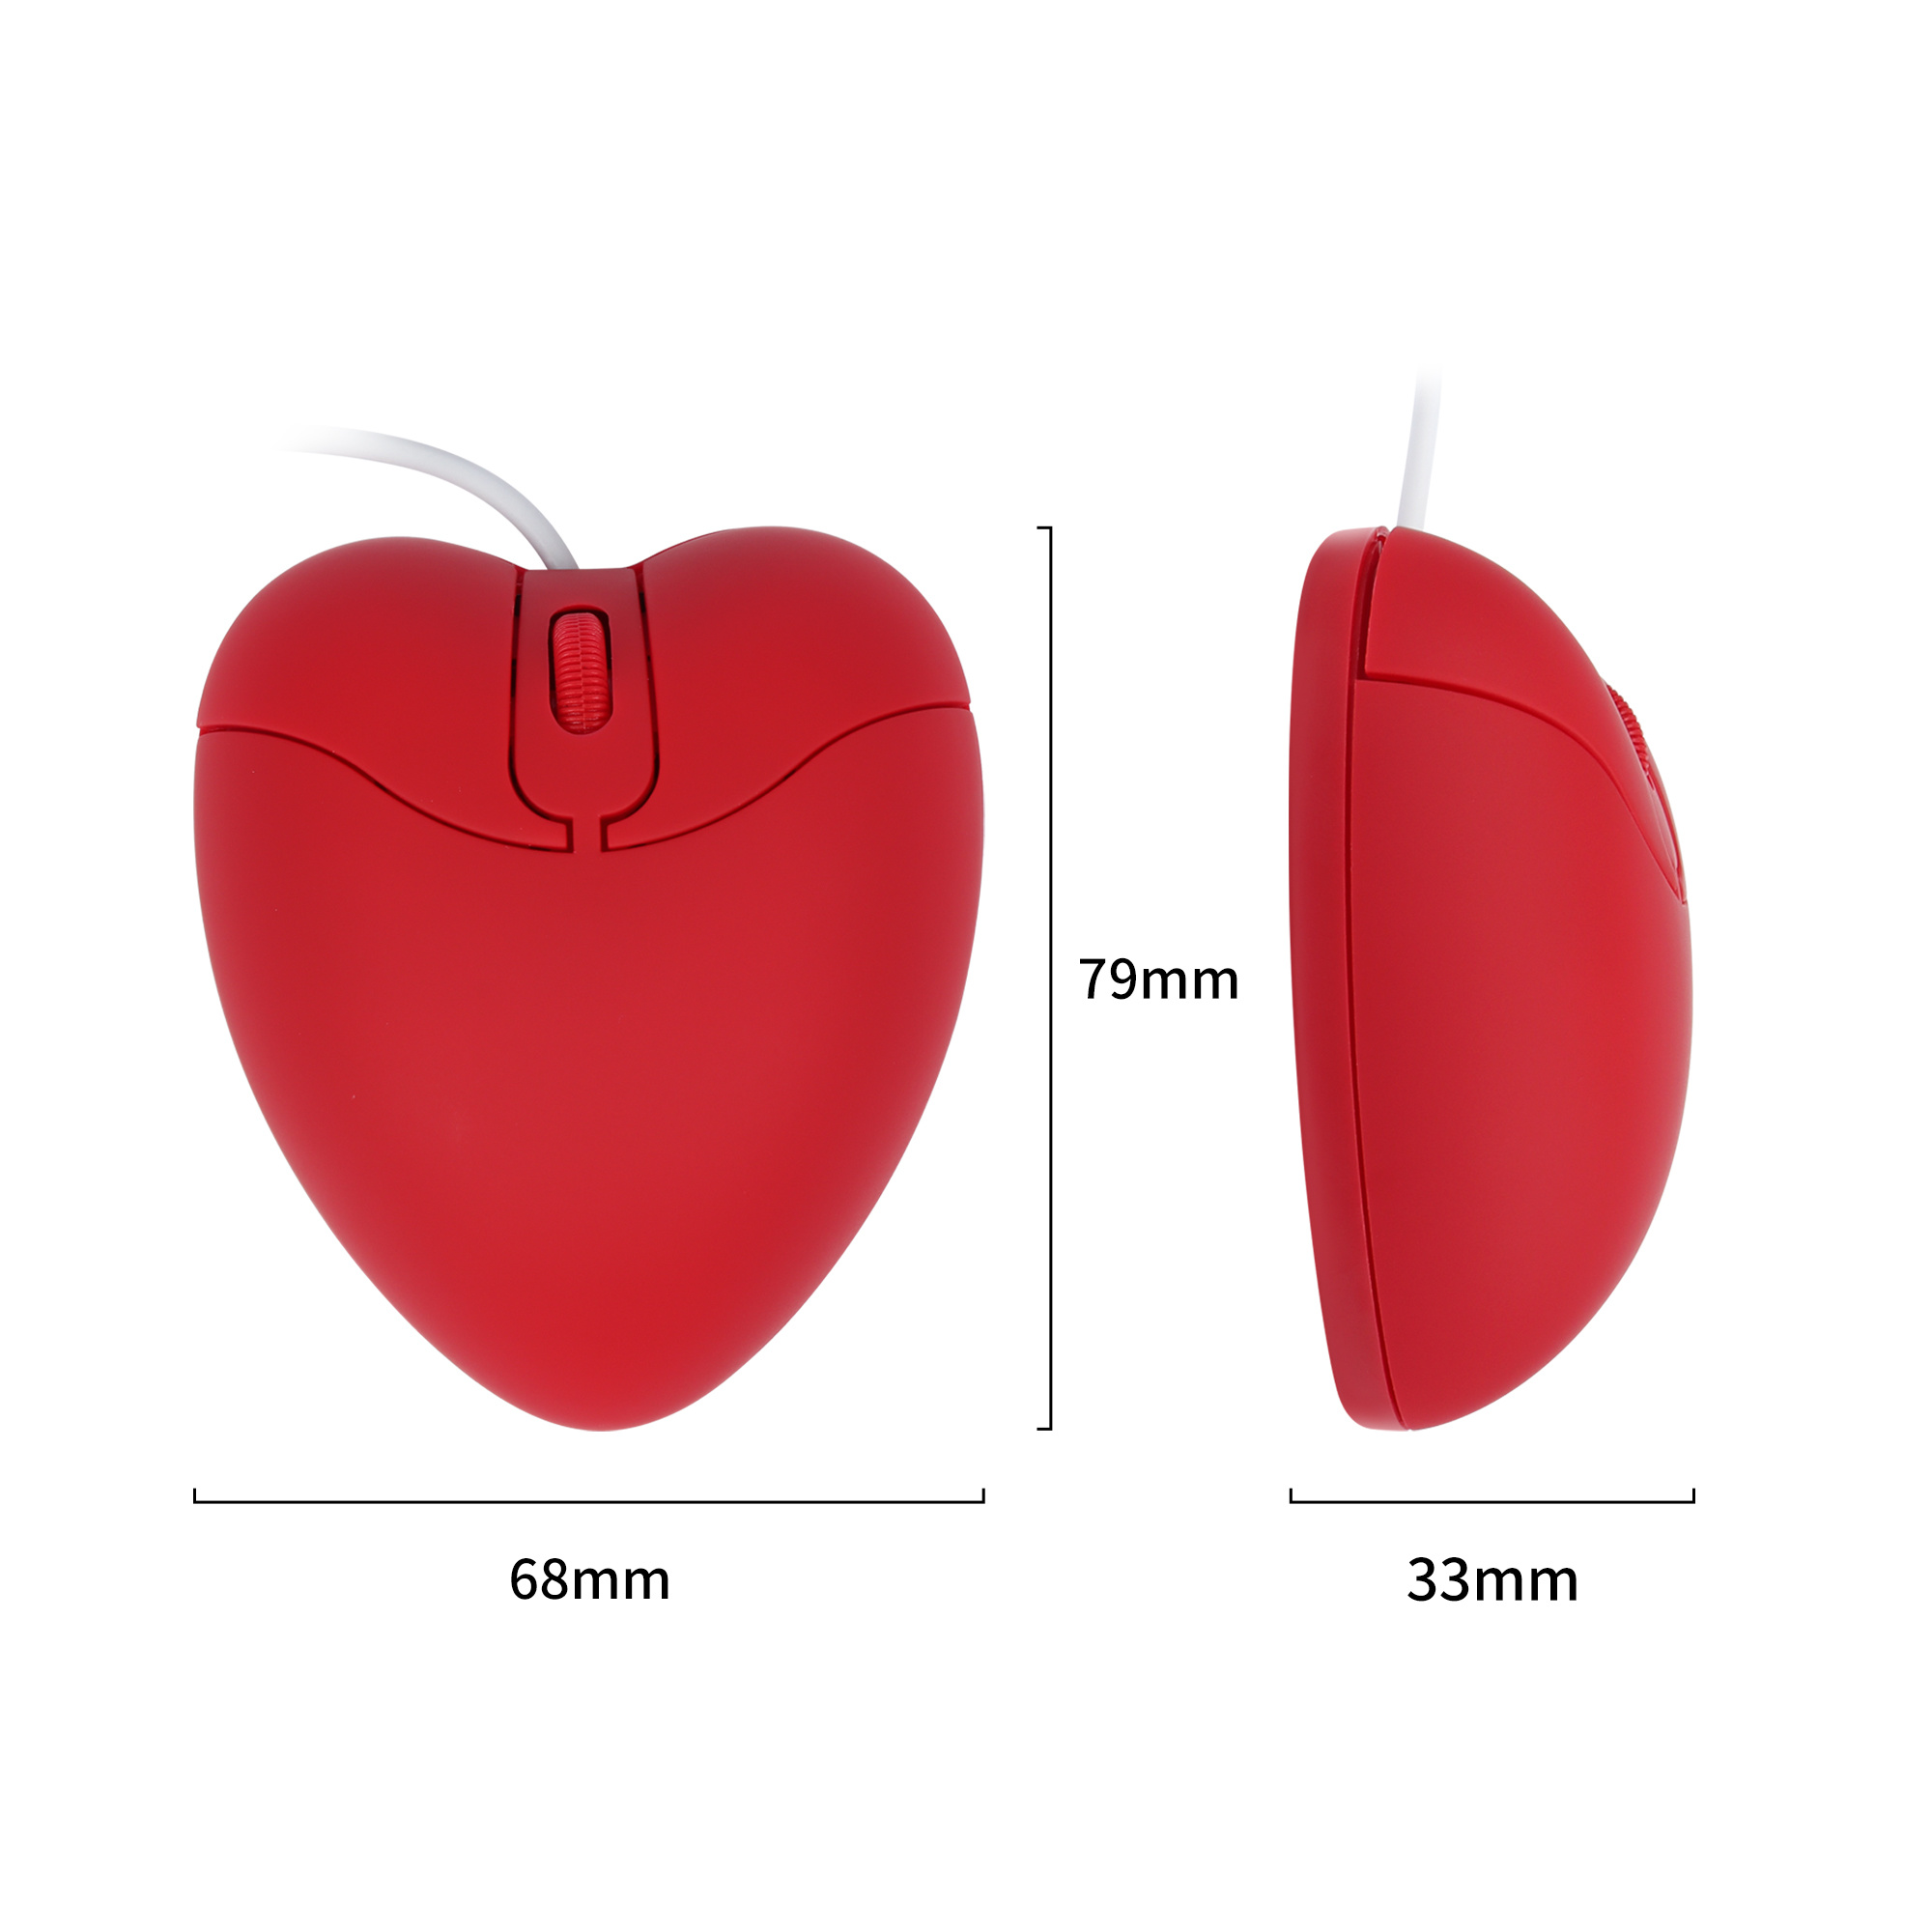 Computer-Wired-Mouse-USB-Optical-Creative-Gaming-Cute-Mause-Ergonomic-Love-Heart-3D-Mice-For-Laptop (4)